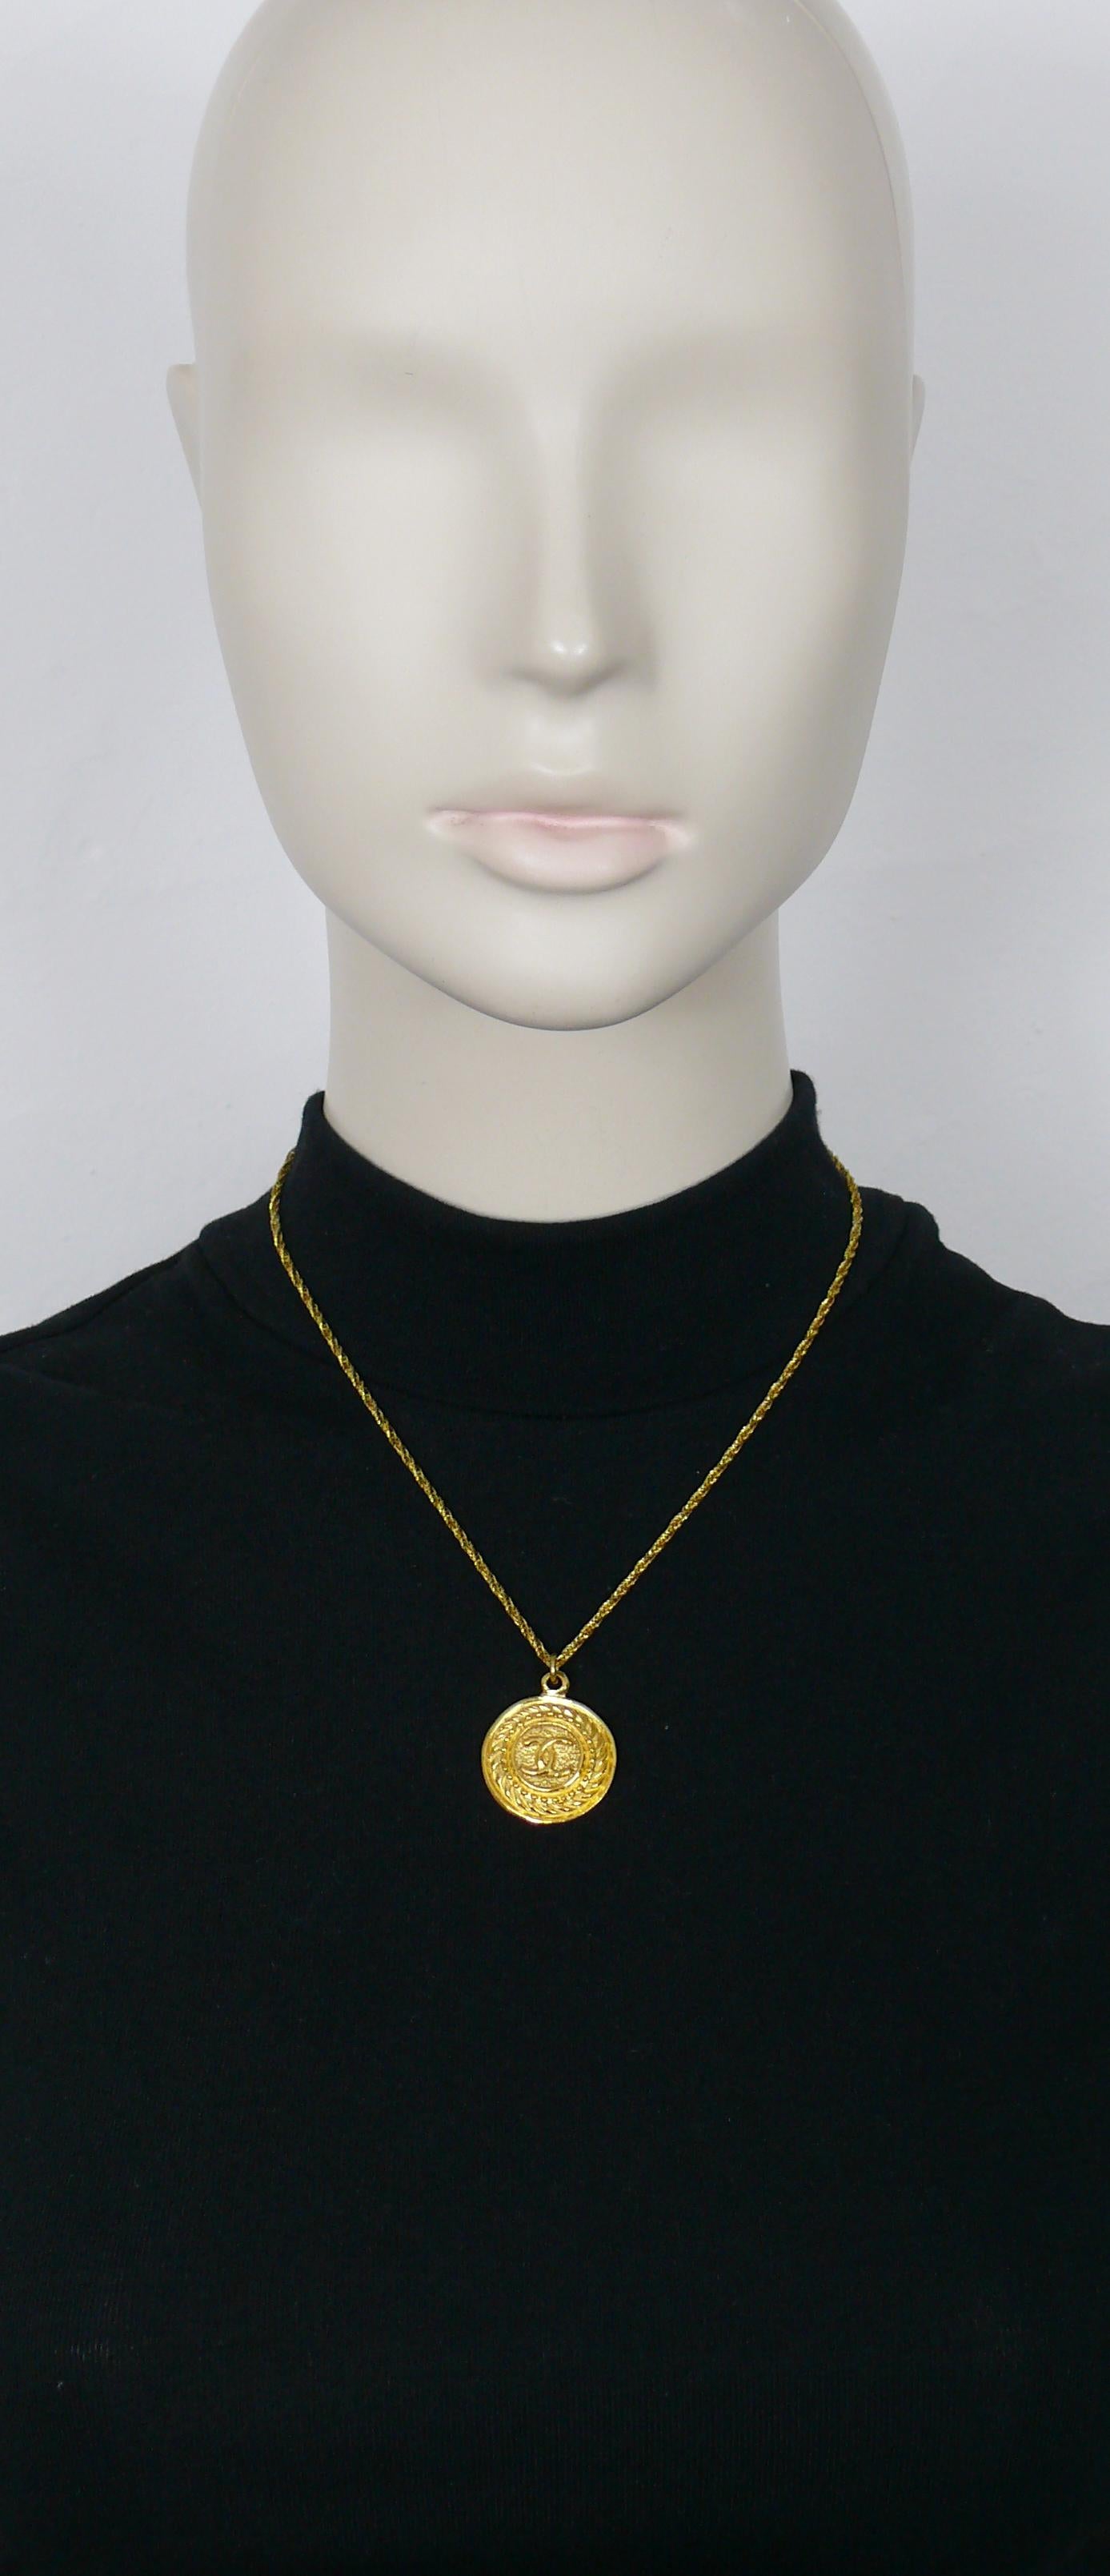 CHANEL vintage chain necklace featuring a CC logo medallion pendant.

Gold tone metal hardware.

Spring clasp closure.

Embossed CHANEL CC Made in France.

Indicative measurements : chain length approx. 43.5 cm (17.13 inches) / pendant diameter